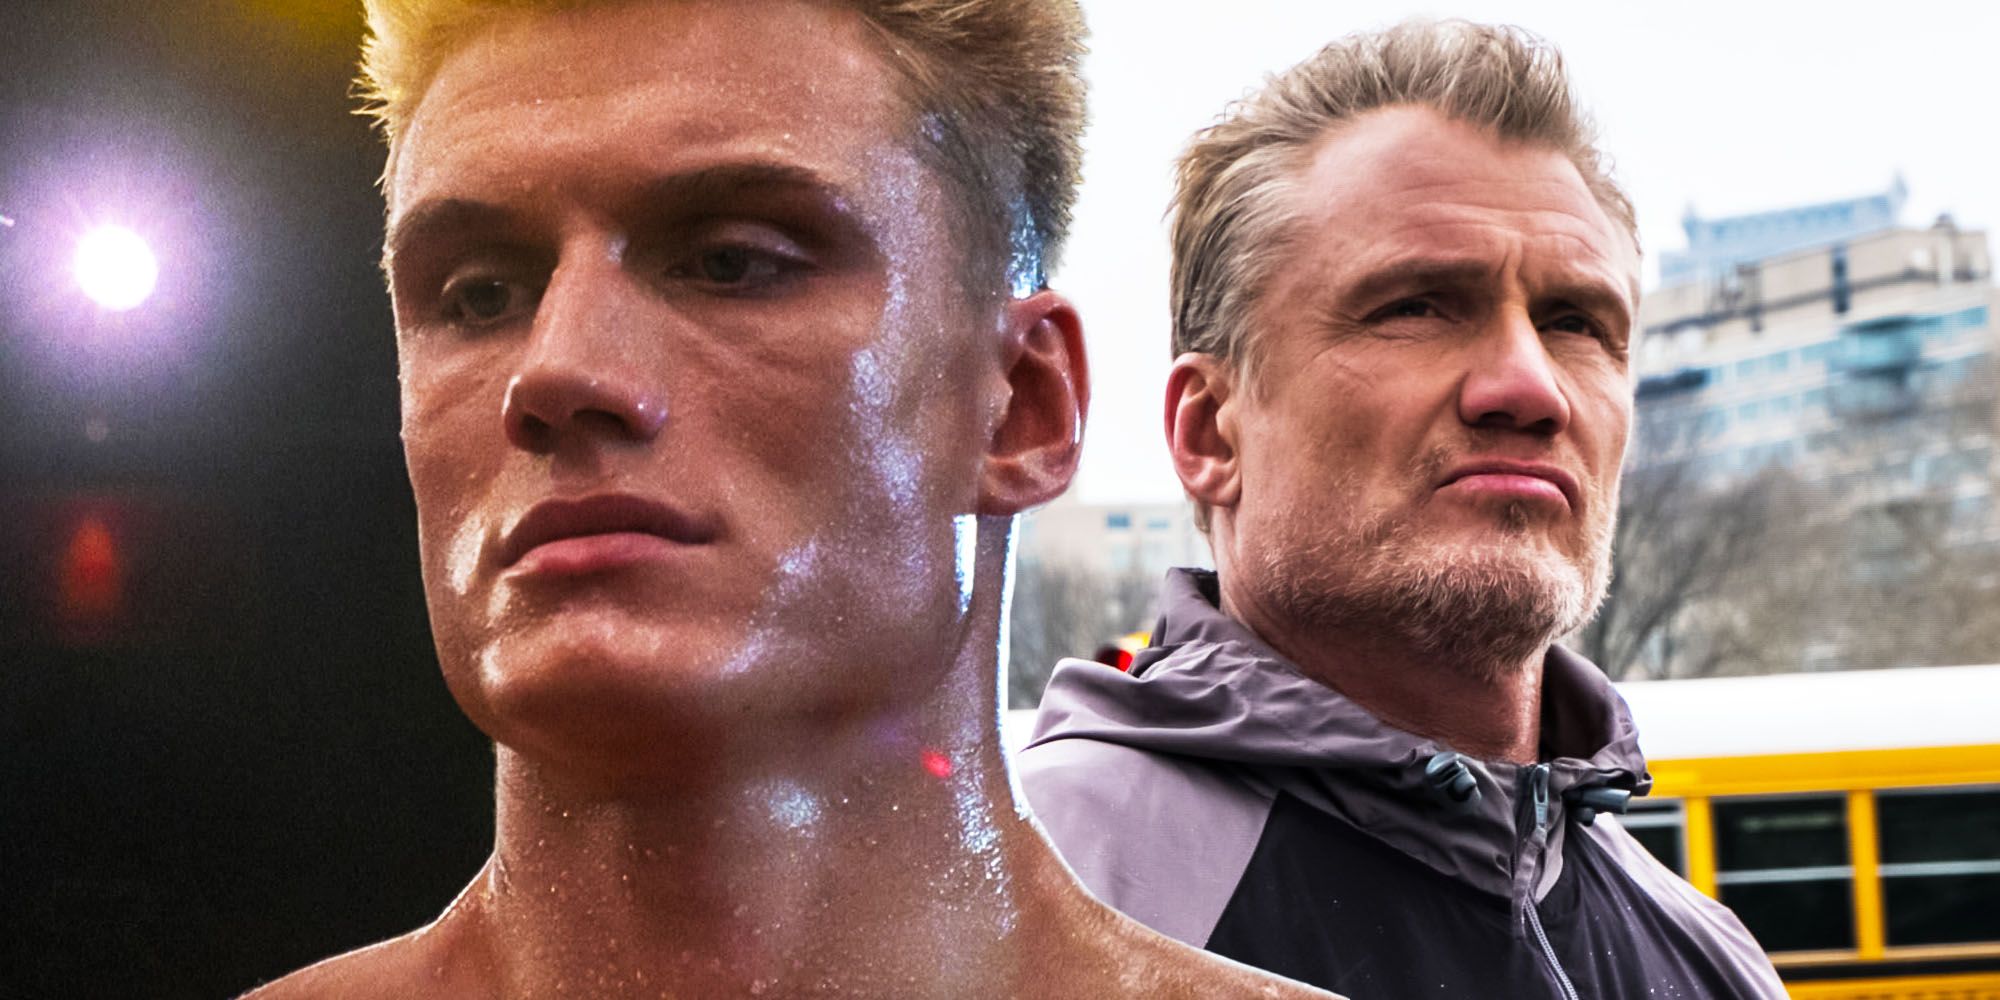 Dolph Lundgren as Ivan Drago in Rocky IV and Creed 2